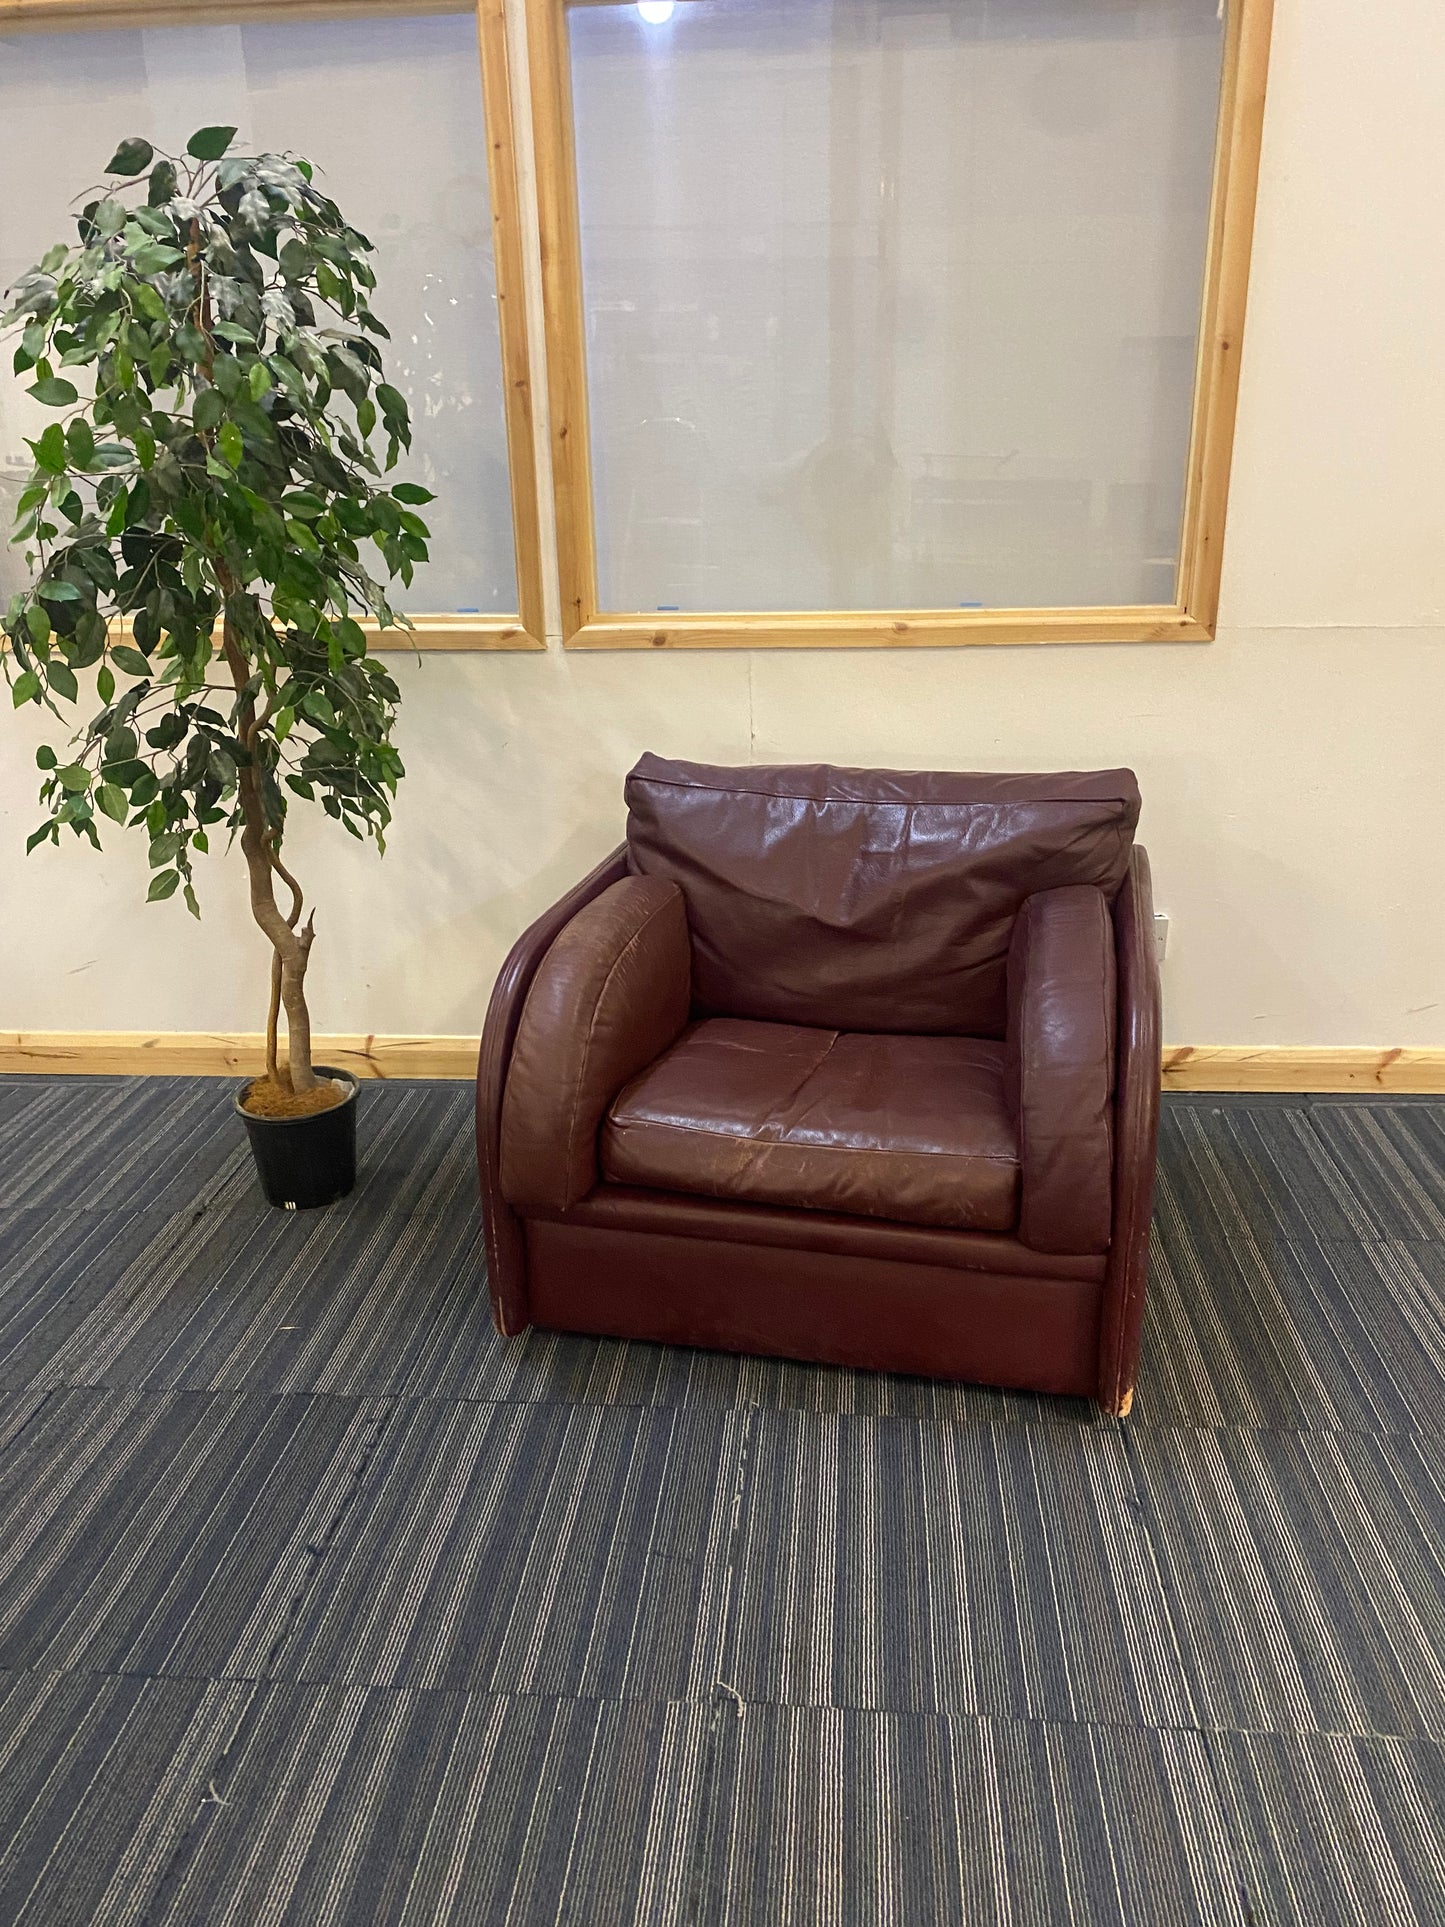 centre photo leather single armchair sofa with plant